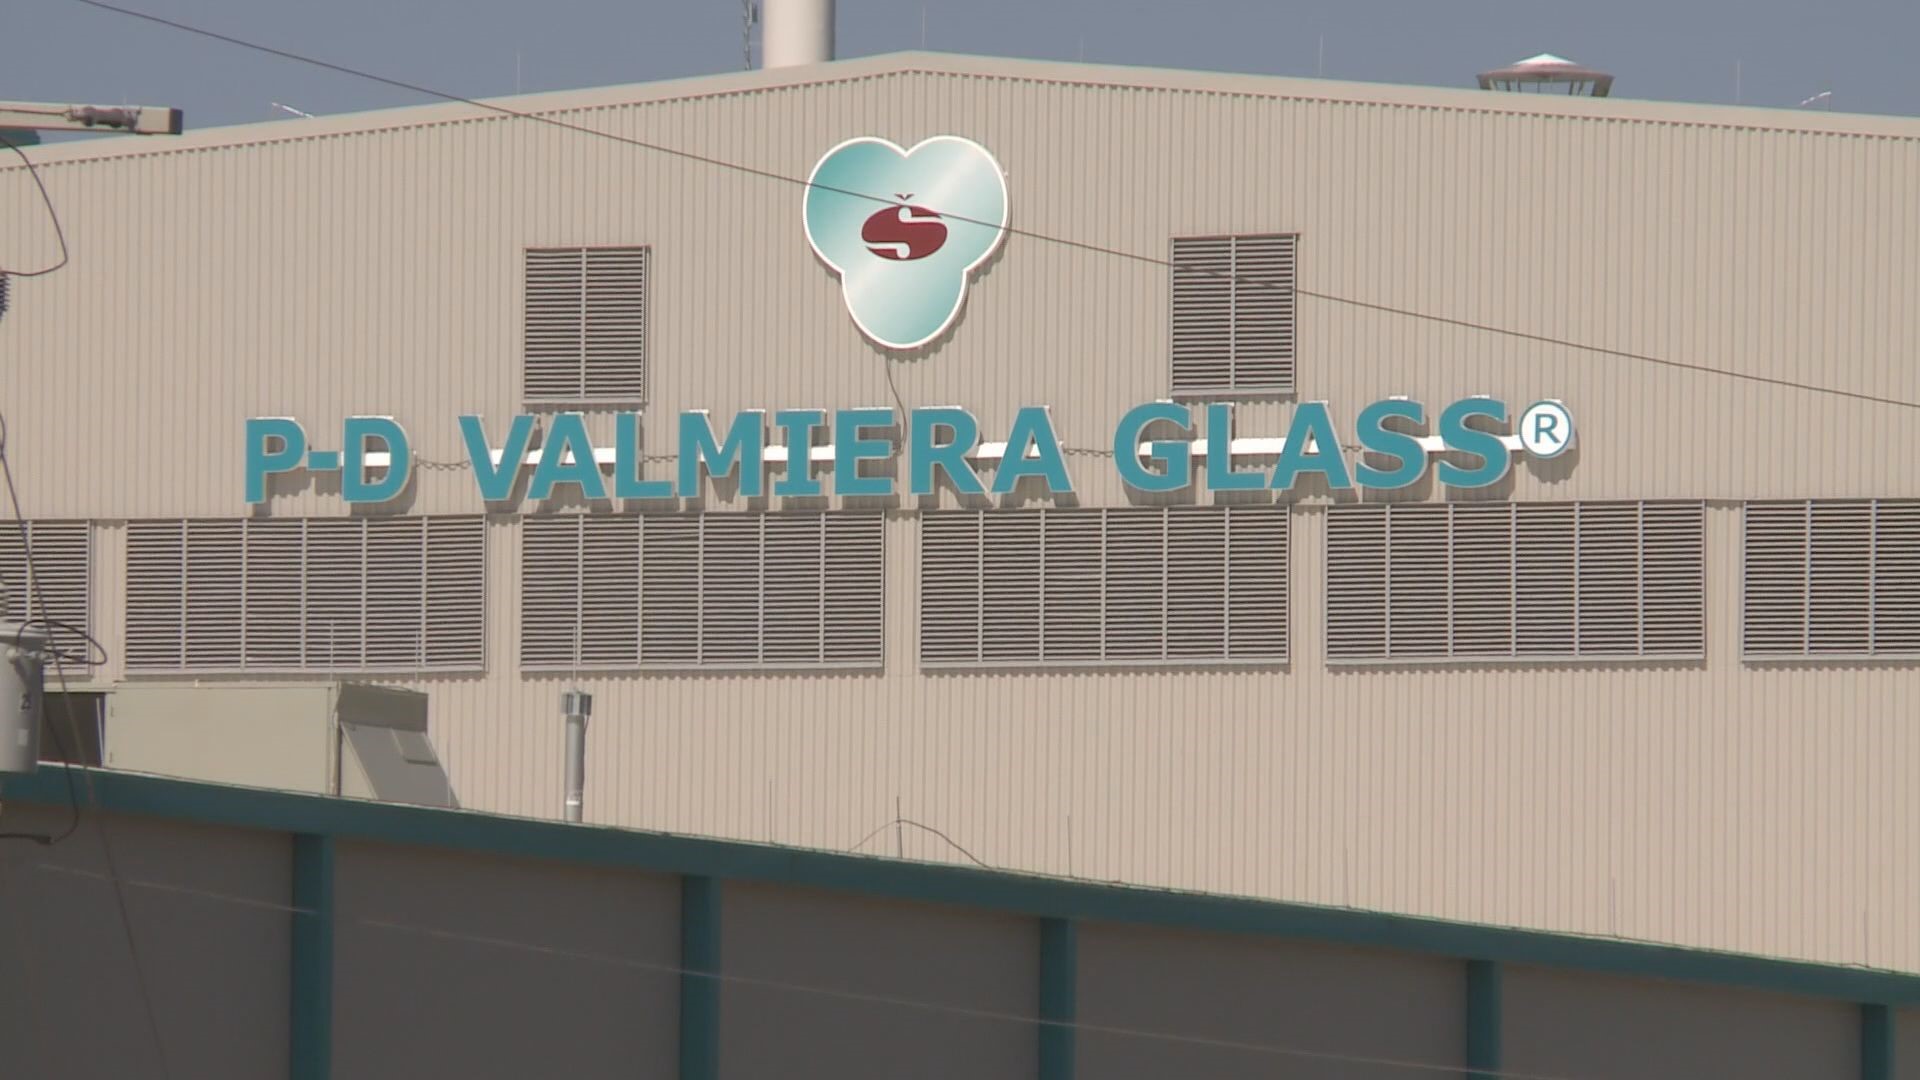 Valmeria glass USA recently terminated more than 300 hundred employees from their Dublin plant and now they are filling for Chapter 11 bankruptcy